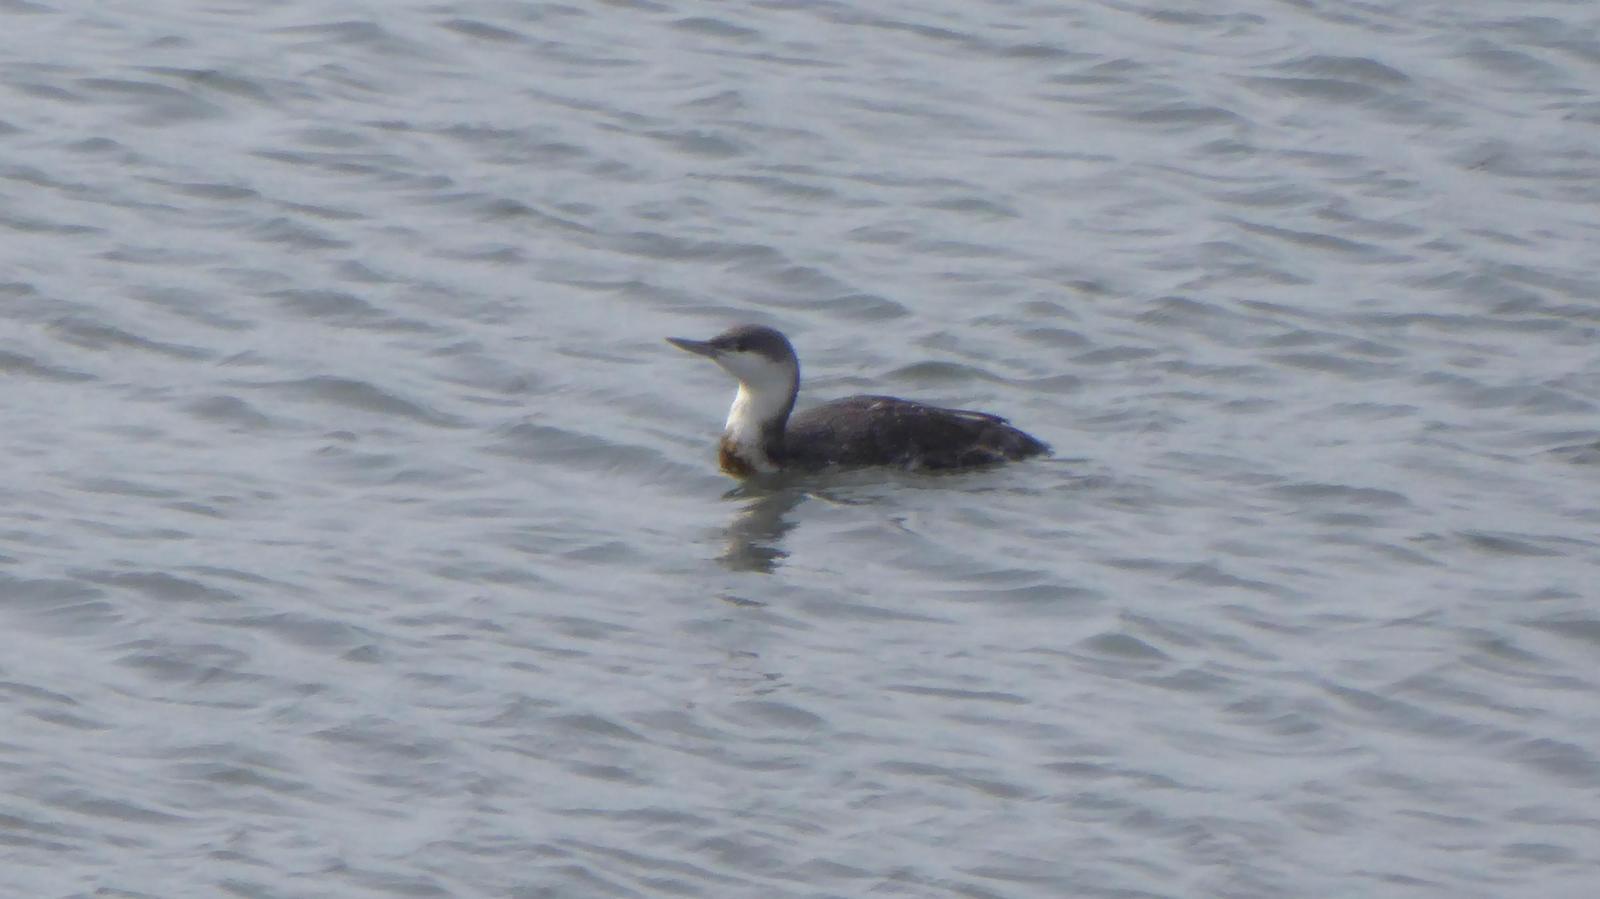 Red-throated Loon Photo by Daliel Leite